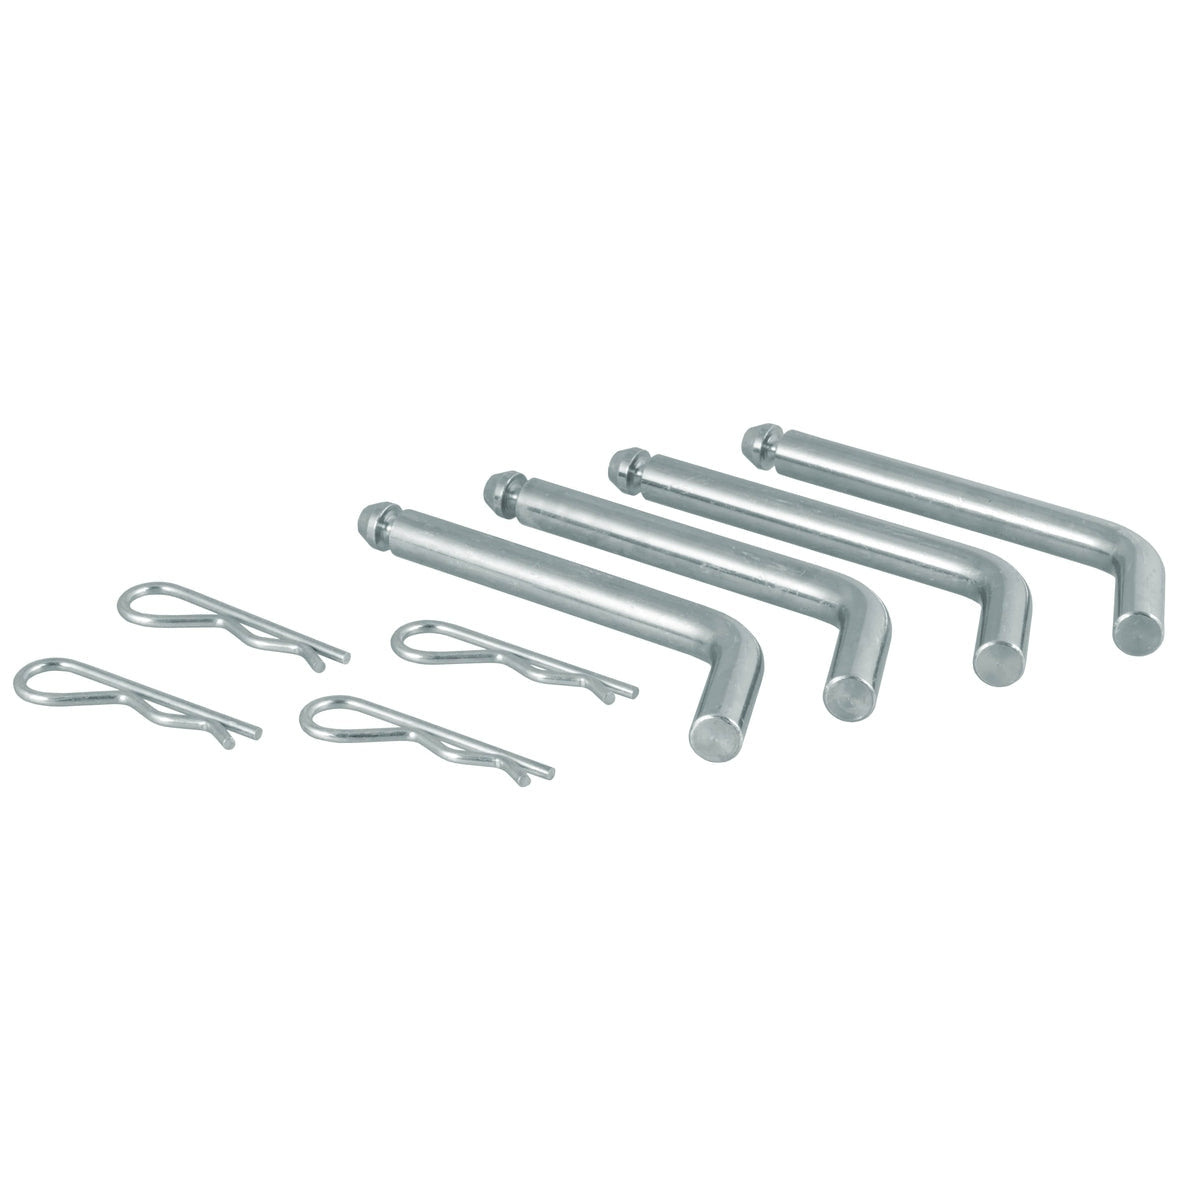 CURT Qualifies for Free Shipping CURT Replacement 5th Wheel Pins & Clips 1/2" Diameter #16902